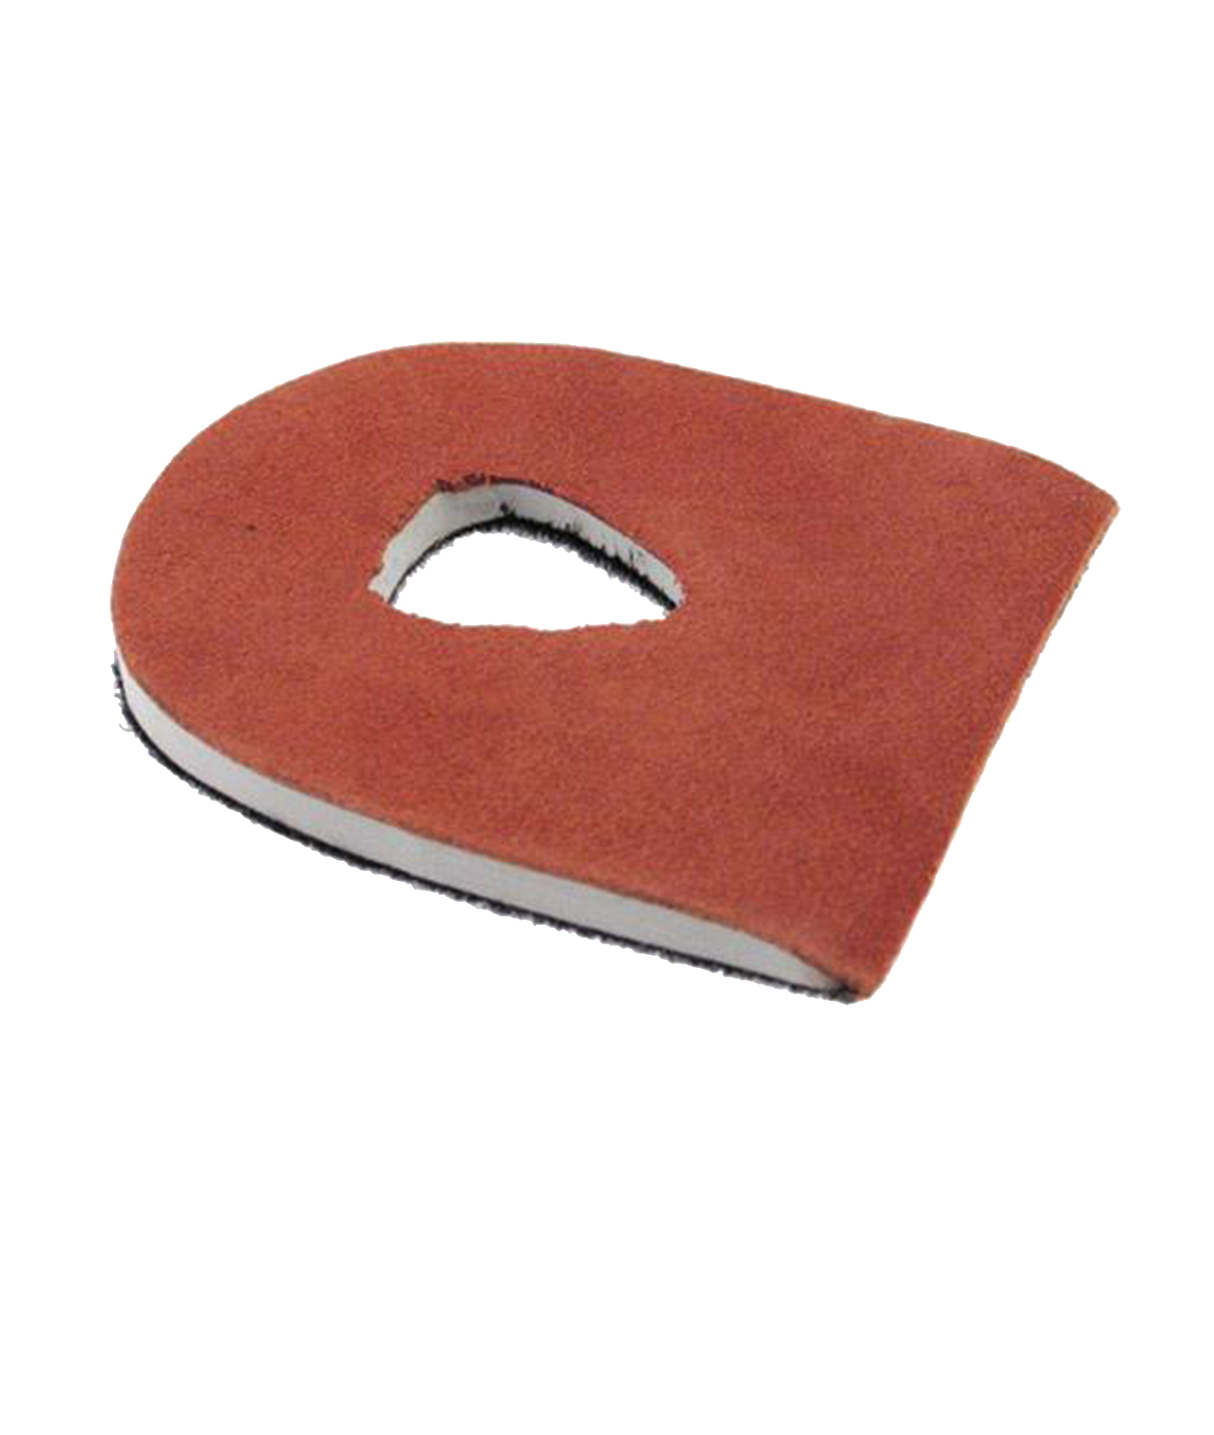 3g Leather Heel Orange Customize your slide with the 3G Interchangeable Heel. Be prepared for any approach and keep one of each on hand.  Backskin - Low Friction Premium slide sole Customize slide for any condition Easy to change M fits size 6-8 L fits size 8.5-11 XL fits size 11.5-13